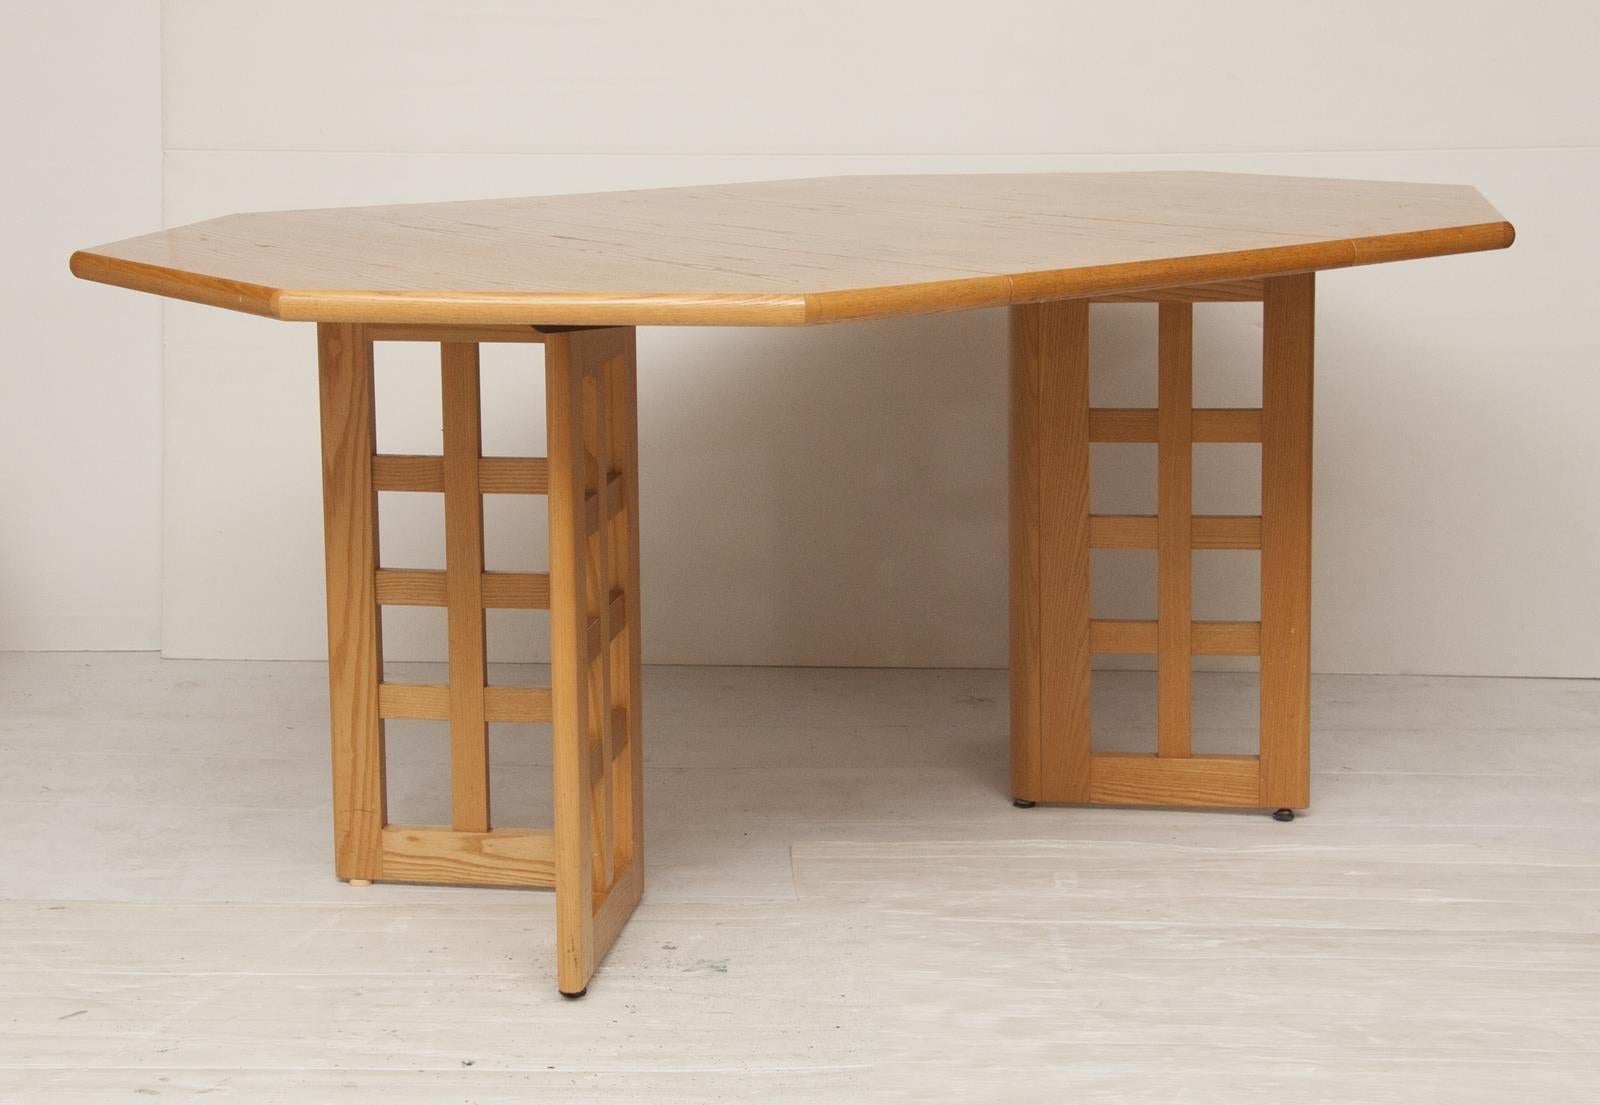 A vintage 1960s extendable dining table and chairs made in solid beech with square detailing throughout the chair backs and table legs.

Measures: Table - H: 75cm, W: 115cm, L: 115cm - 160cm

Chairs - H: 100cm, W: 47cm, D: 49cm.

 